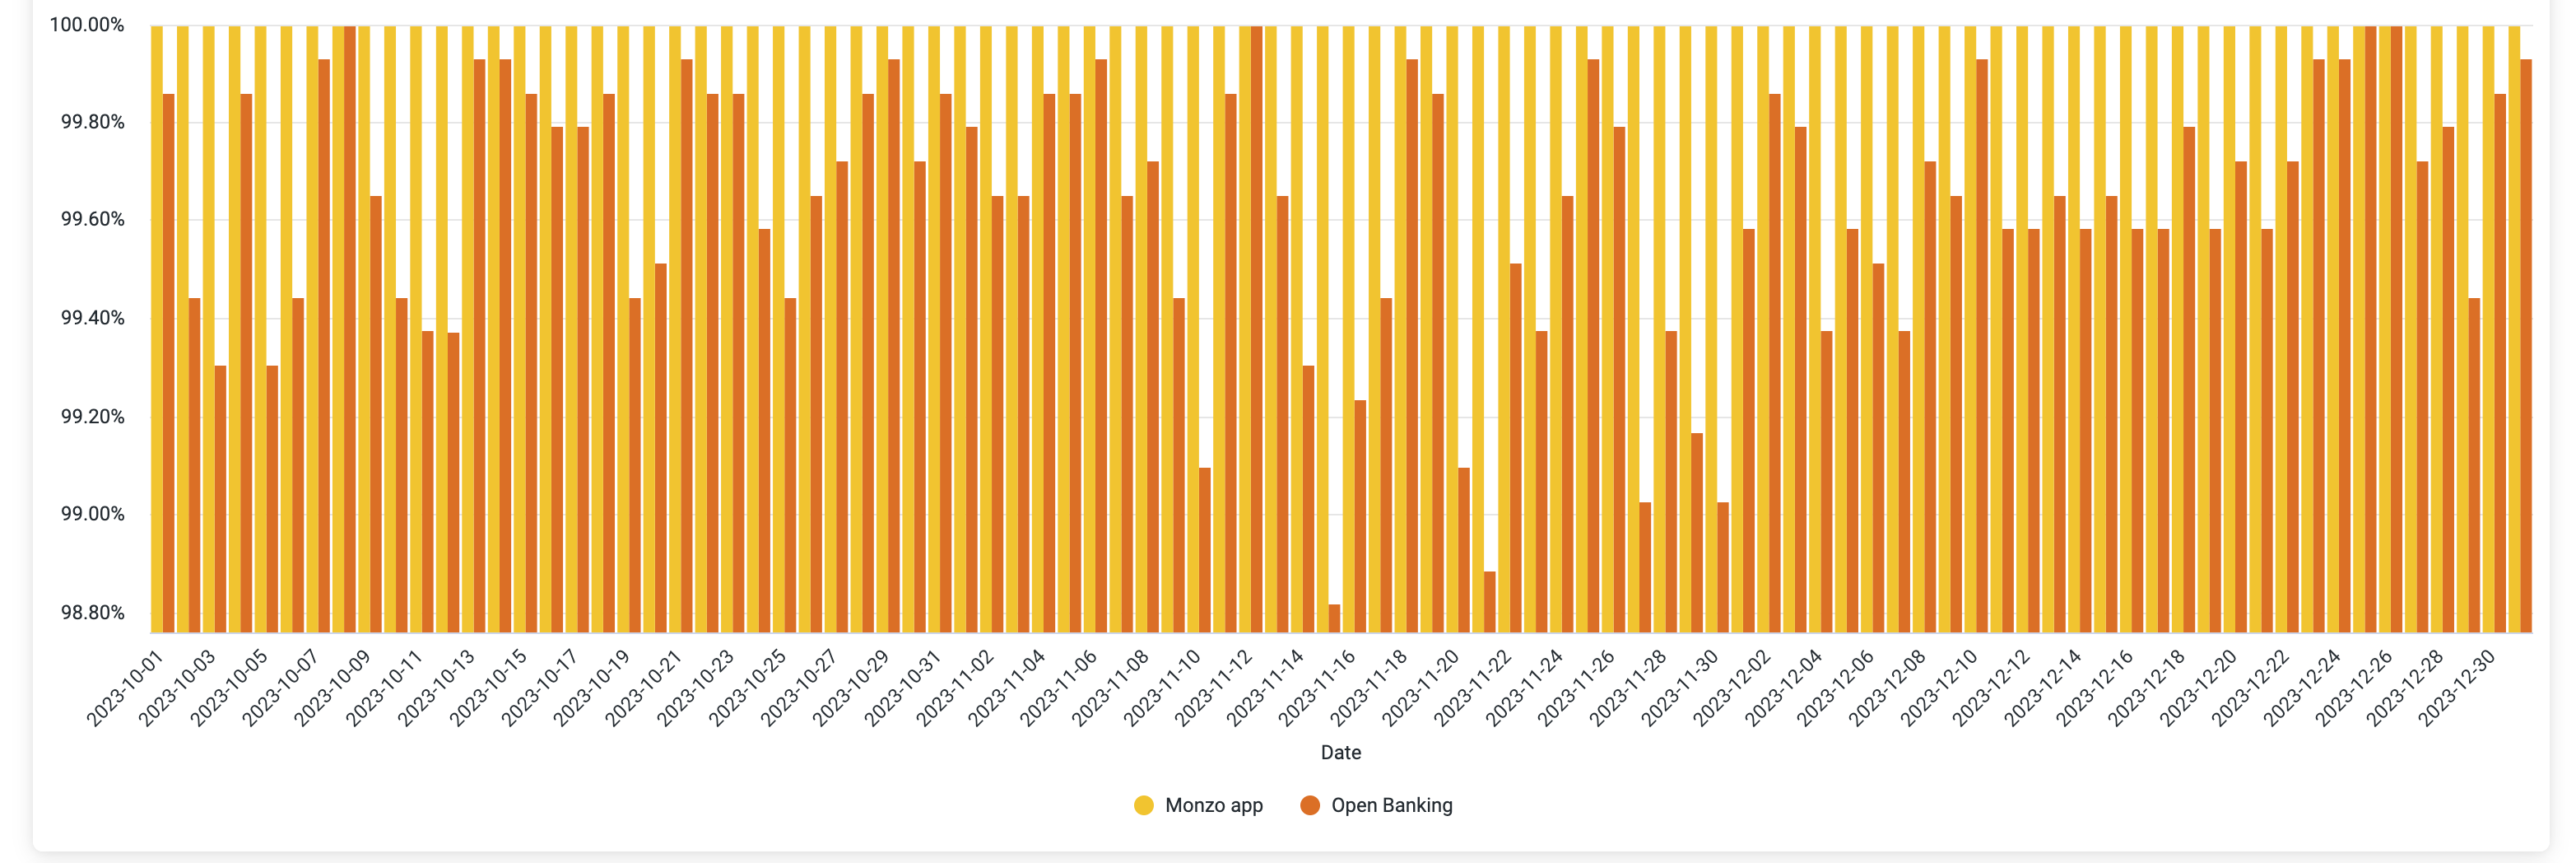 A chart showing the daily uptime of the Monzo App and Open Banking APIs. The data used to generate this chart is included in the table below.